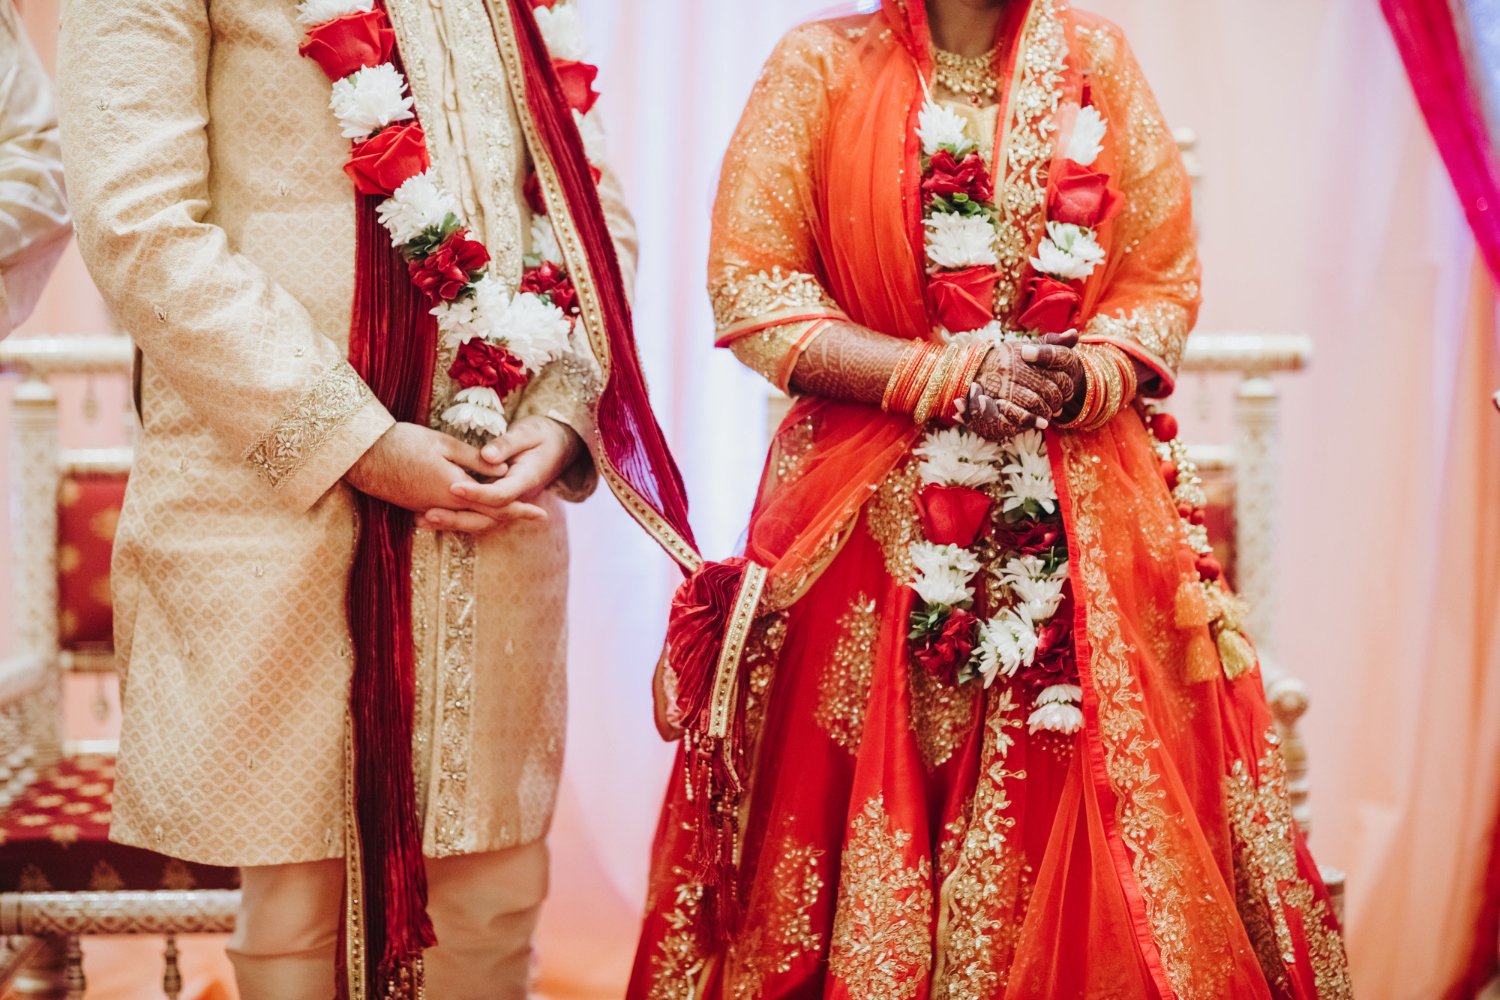 Arranged Marriages in Modern India: Balancing Tradition and Choice.